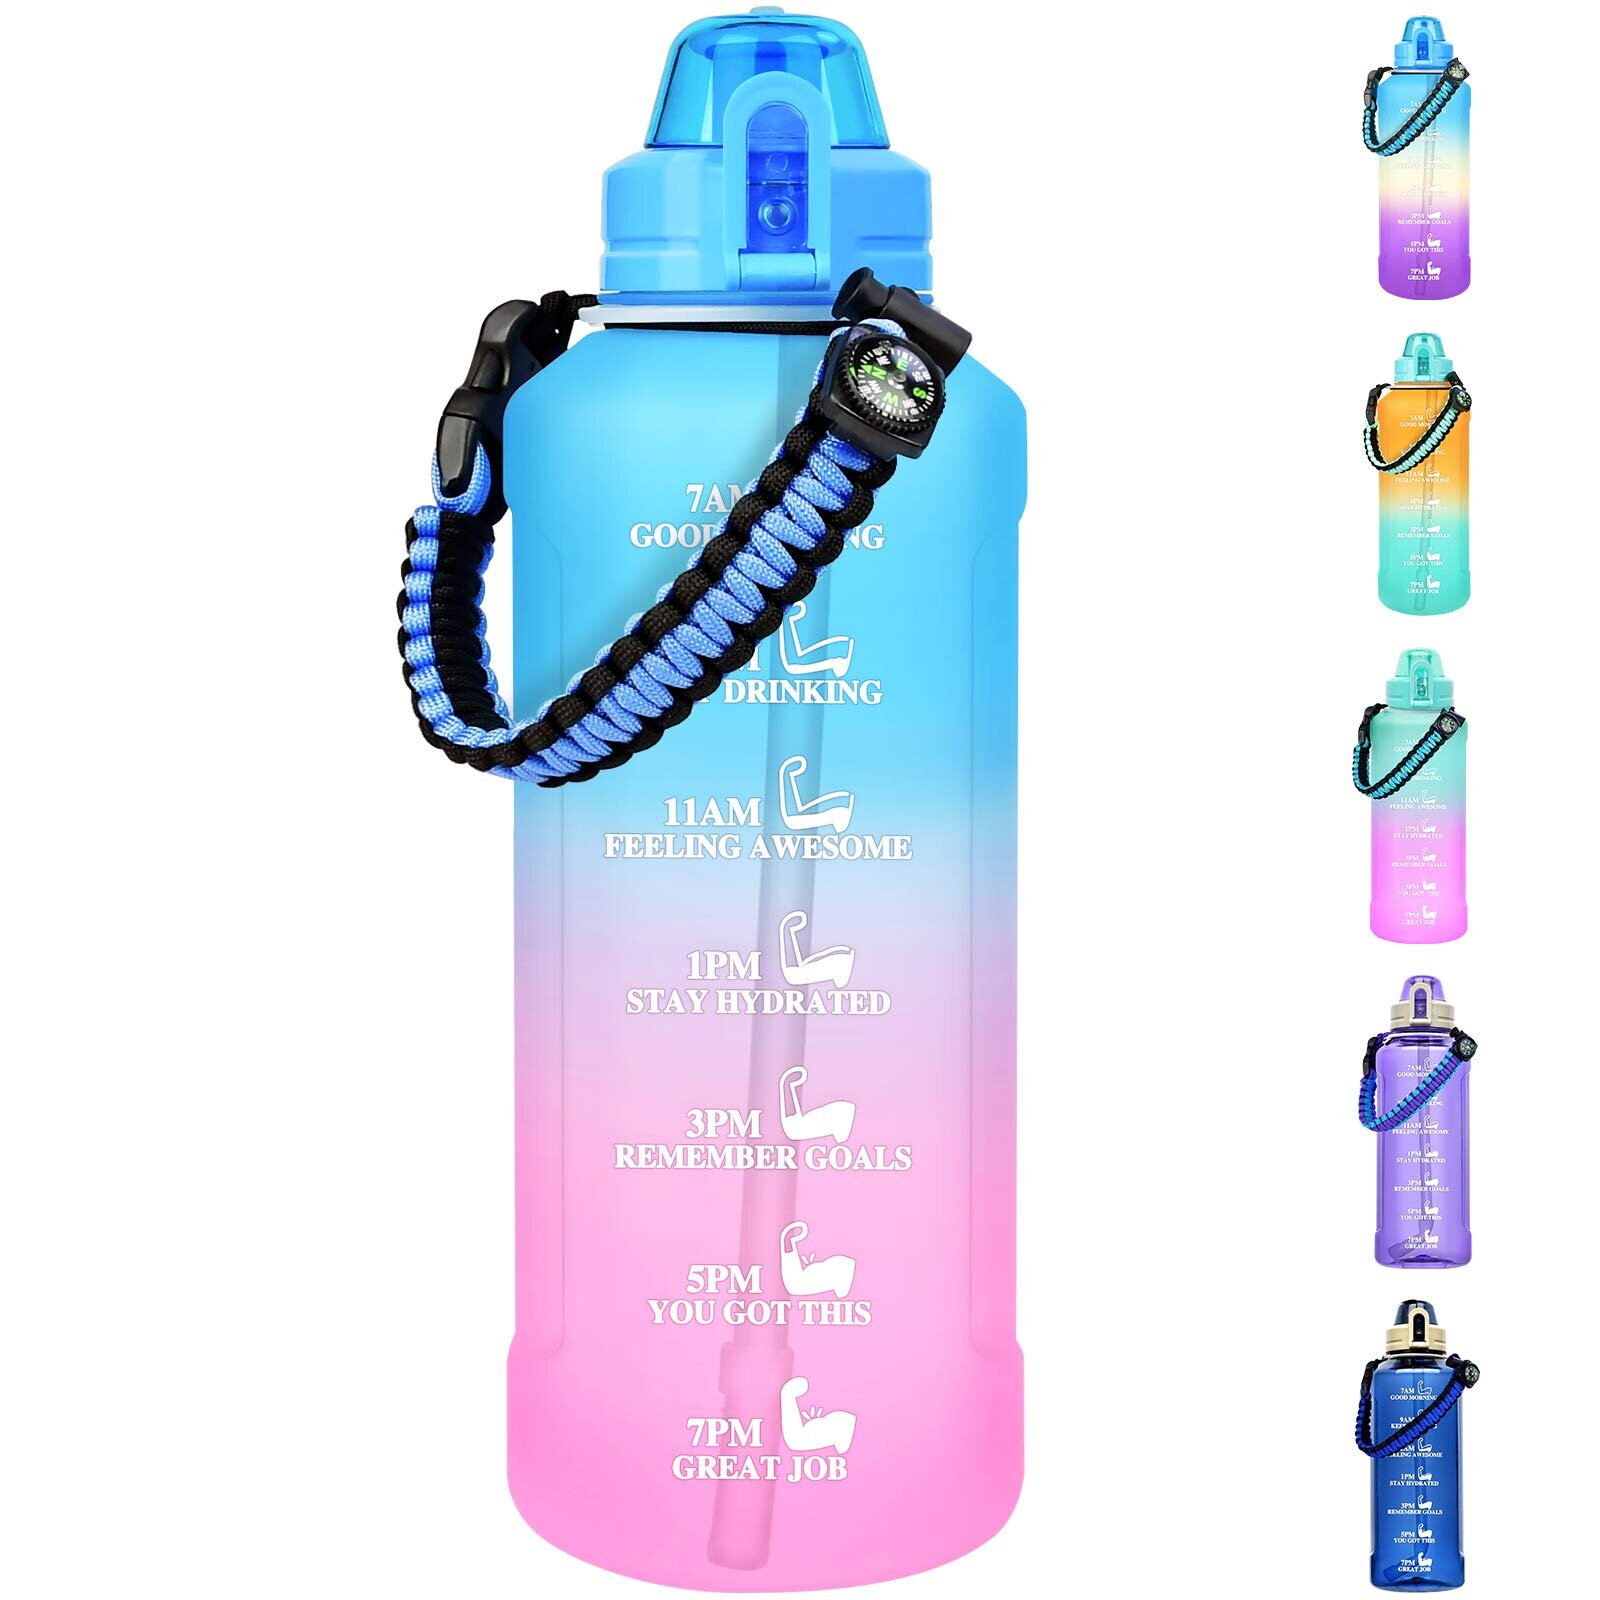 Dishwasher Safe Leakproof BPA Free Tritan Bottle for Outdoor Sports Hiking Motivational Water Bottles with Times to Drink 32oz Drink Reminder with Time Marker & Straw/Spout & Brush Wide Mouth 